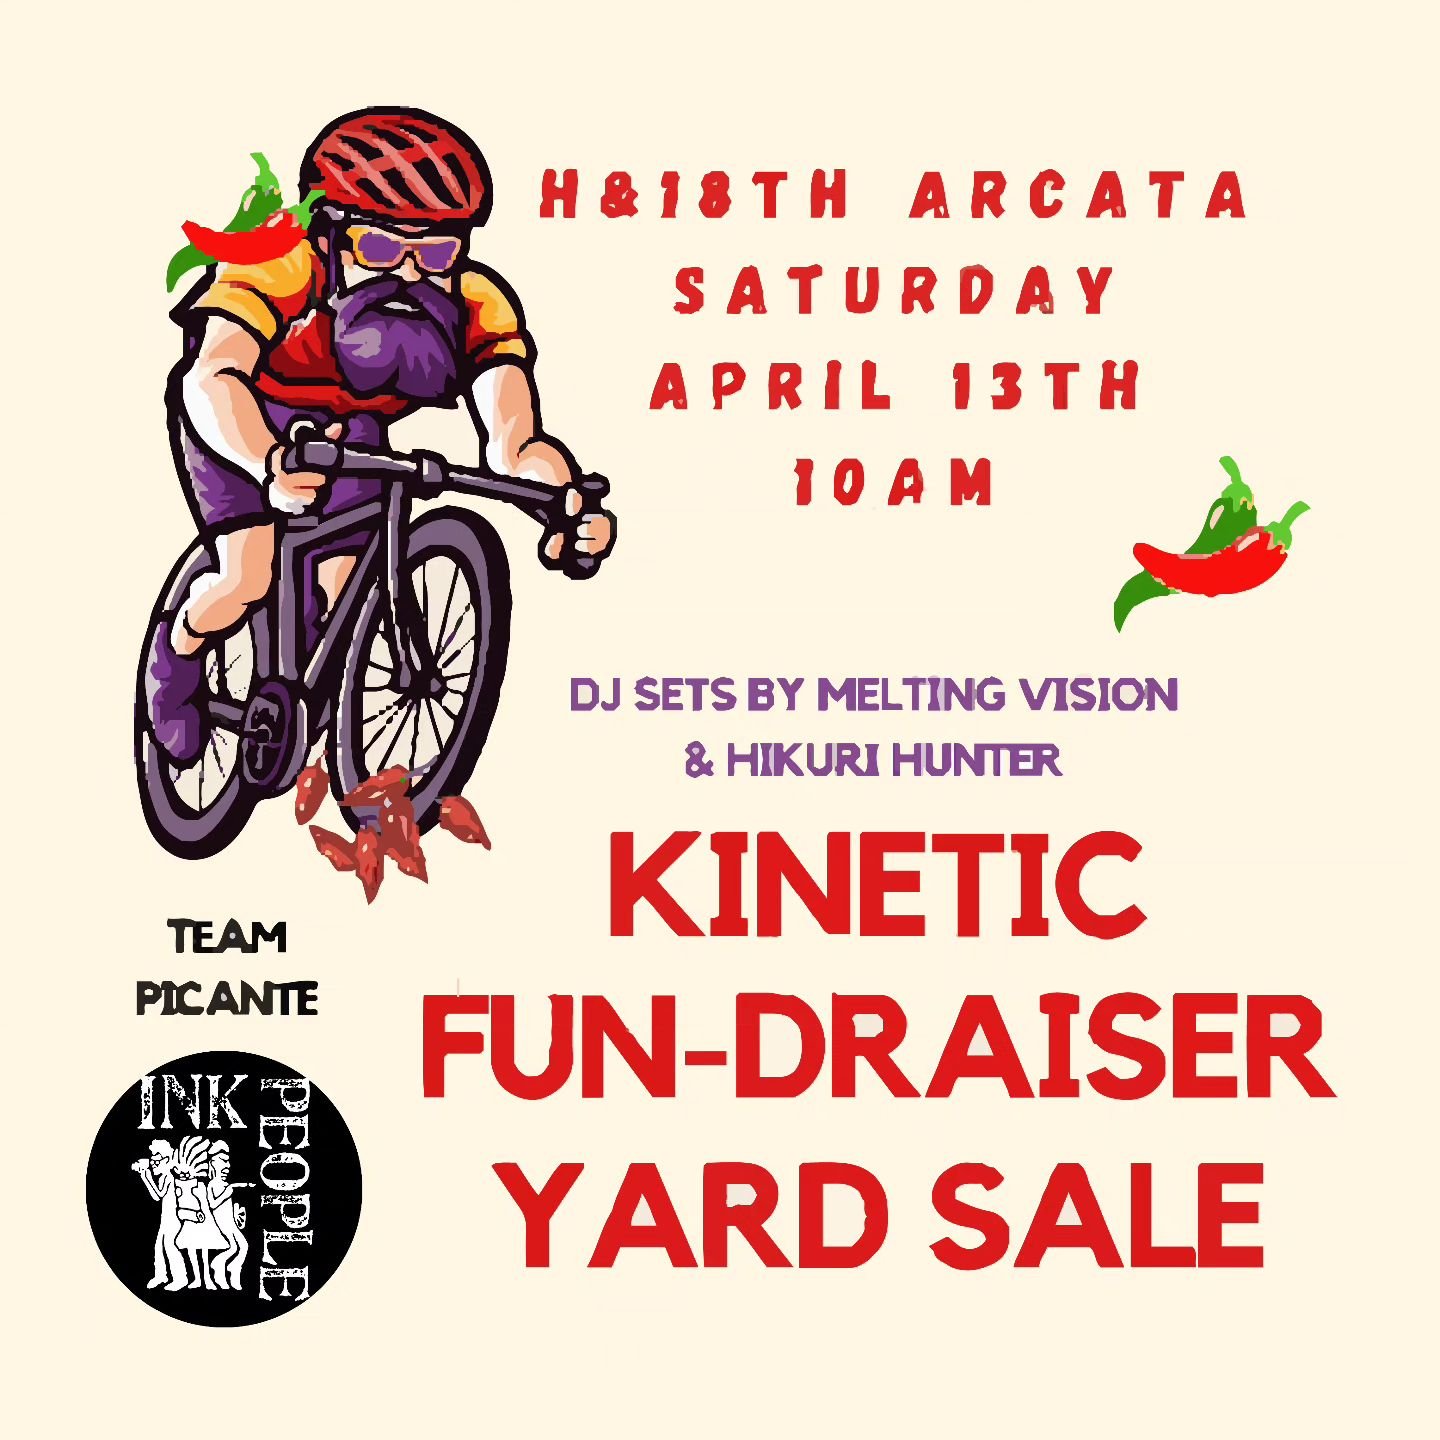 What do you think would be at a Kinetic Team's yard sale? Probably some neat things! Don't miss out on this opportunity to support Team Picante at a FUN-draiser&nbsp;this Saturday, April 13 at 10am.

Team Picante is a DreamMaker project of the Ink Pe